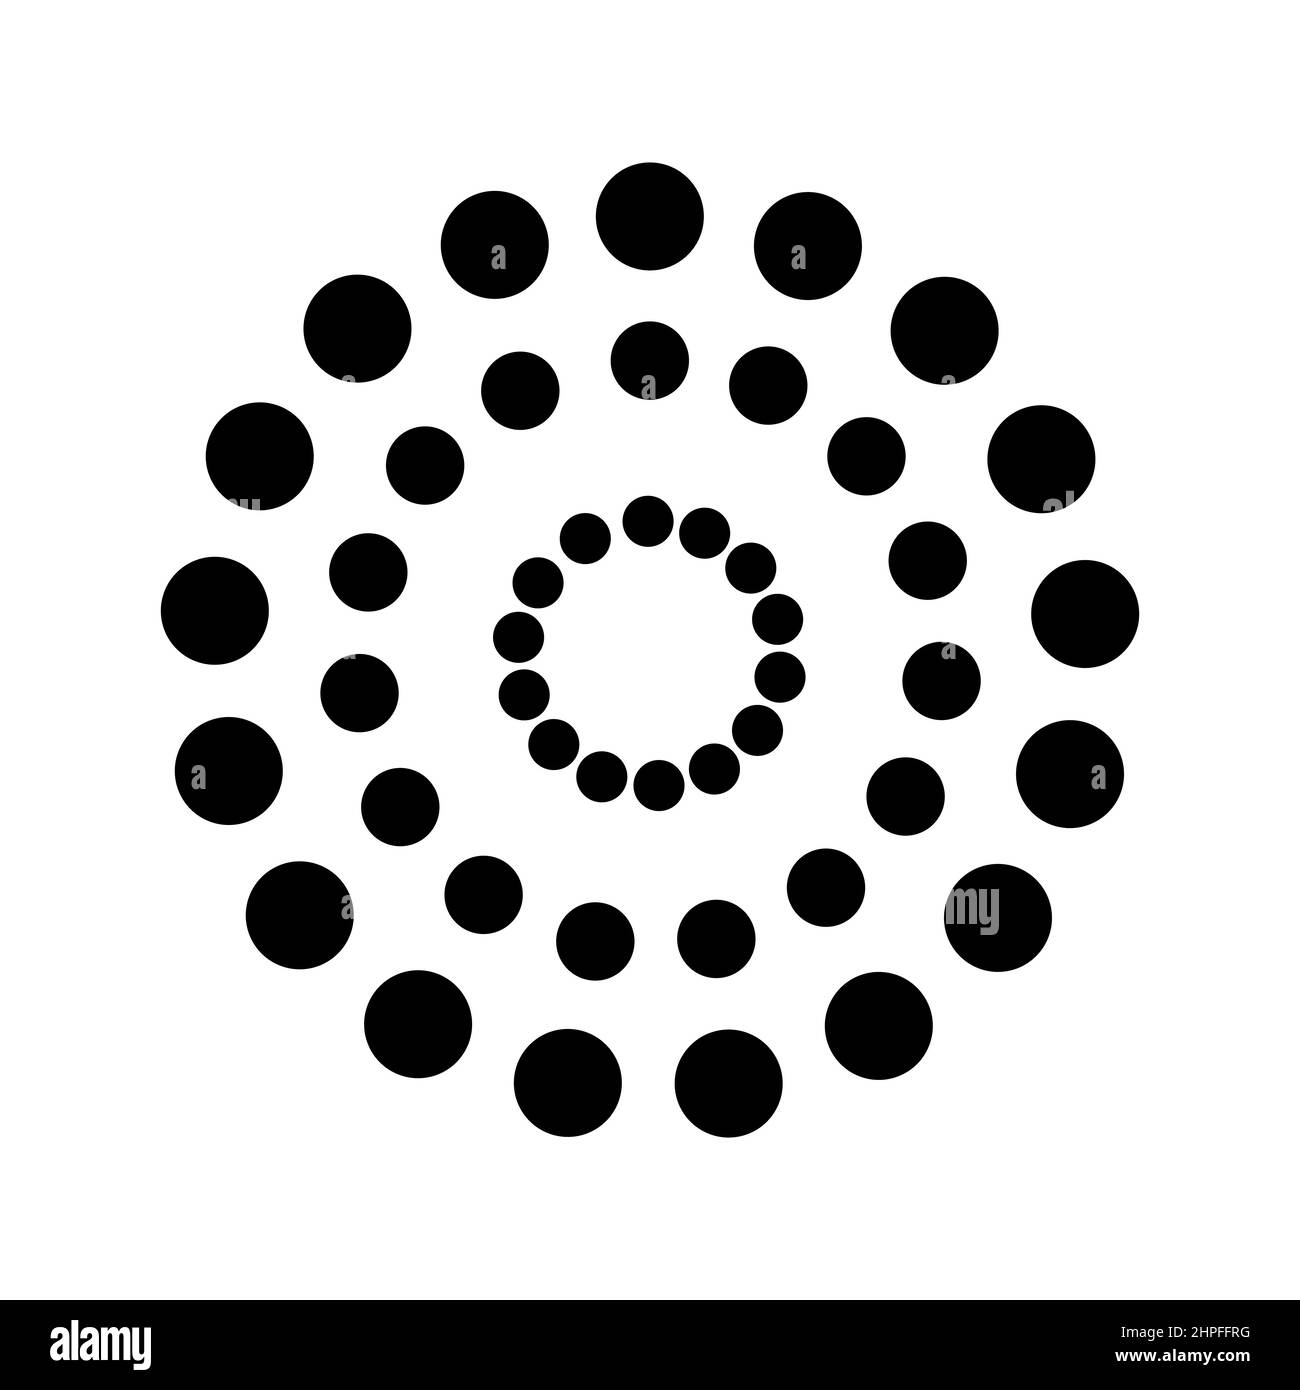 600+ Different Size Dots Stock Illustrations, Royalty-Free Vector